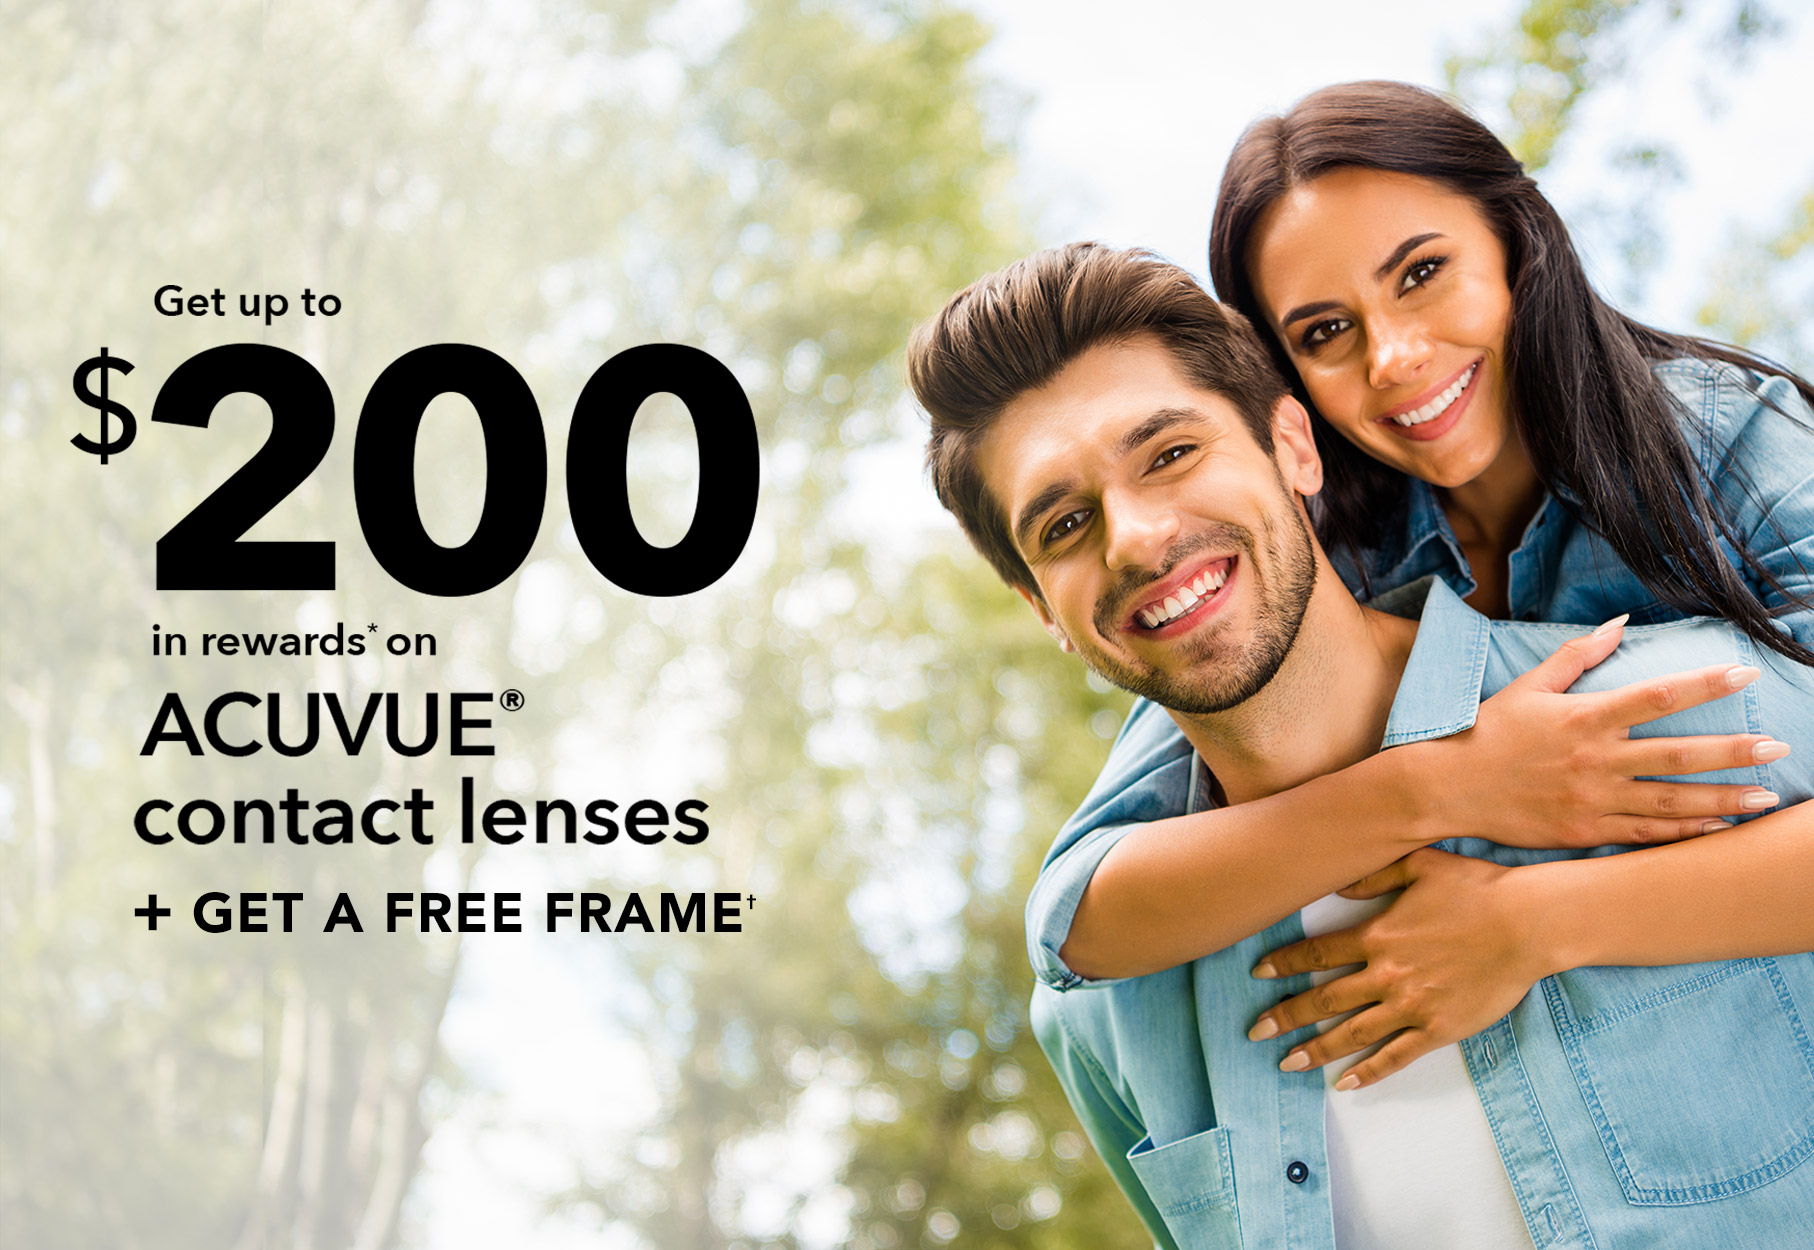 Text: GET UP TO $200 IN REWARDS ON ACUVUE CONTACT LENSES* + Get a free frame† Photo: Couple with trees in the background